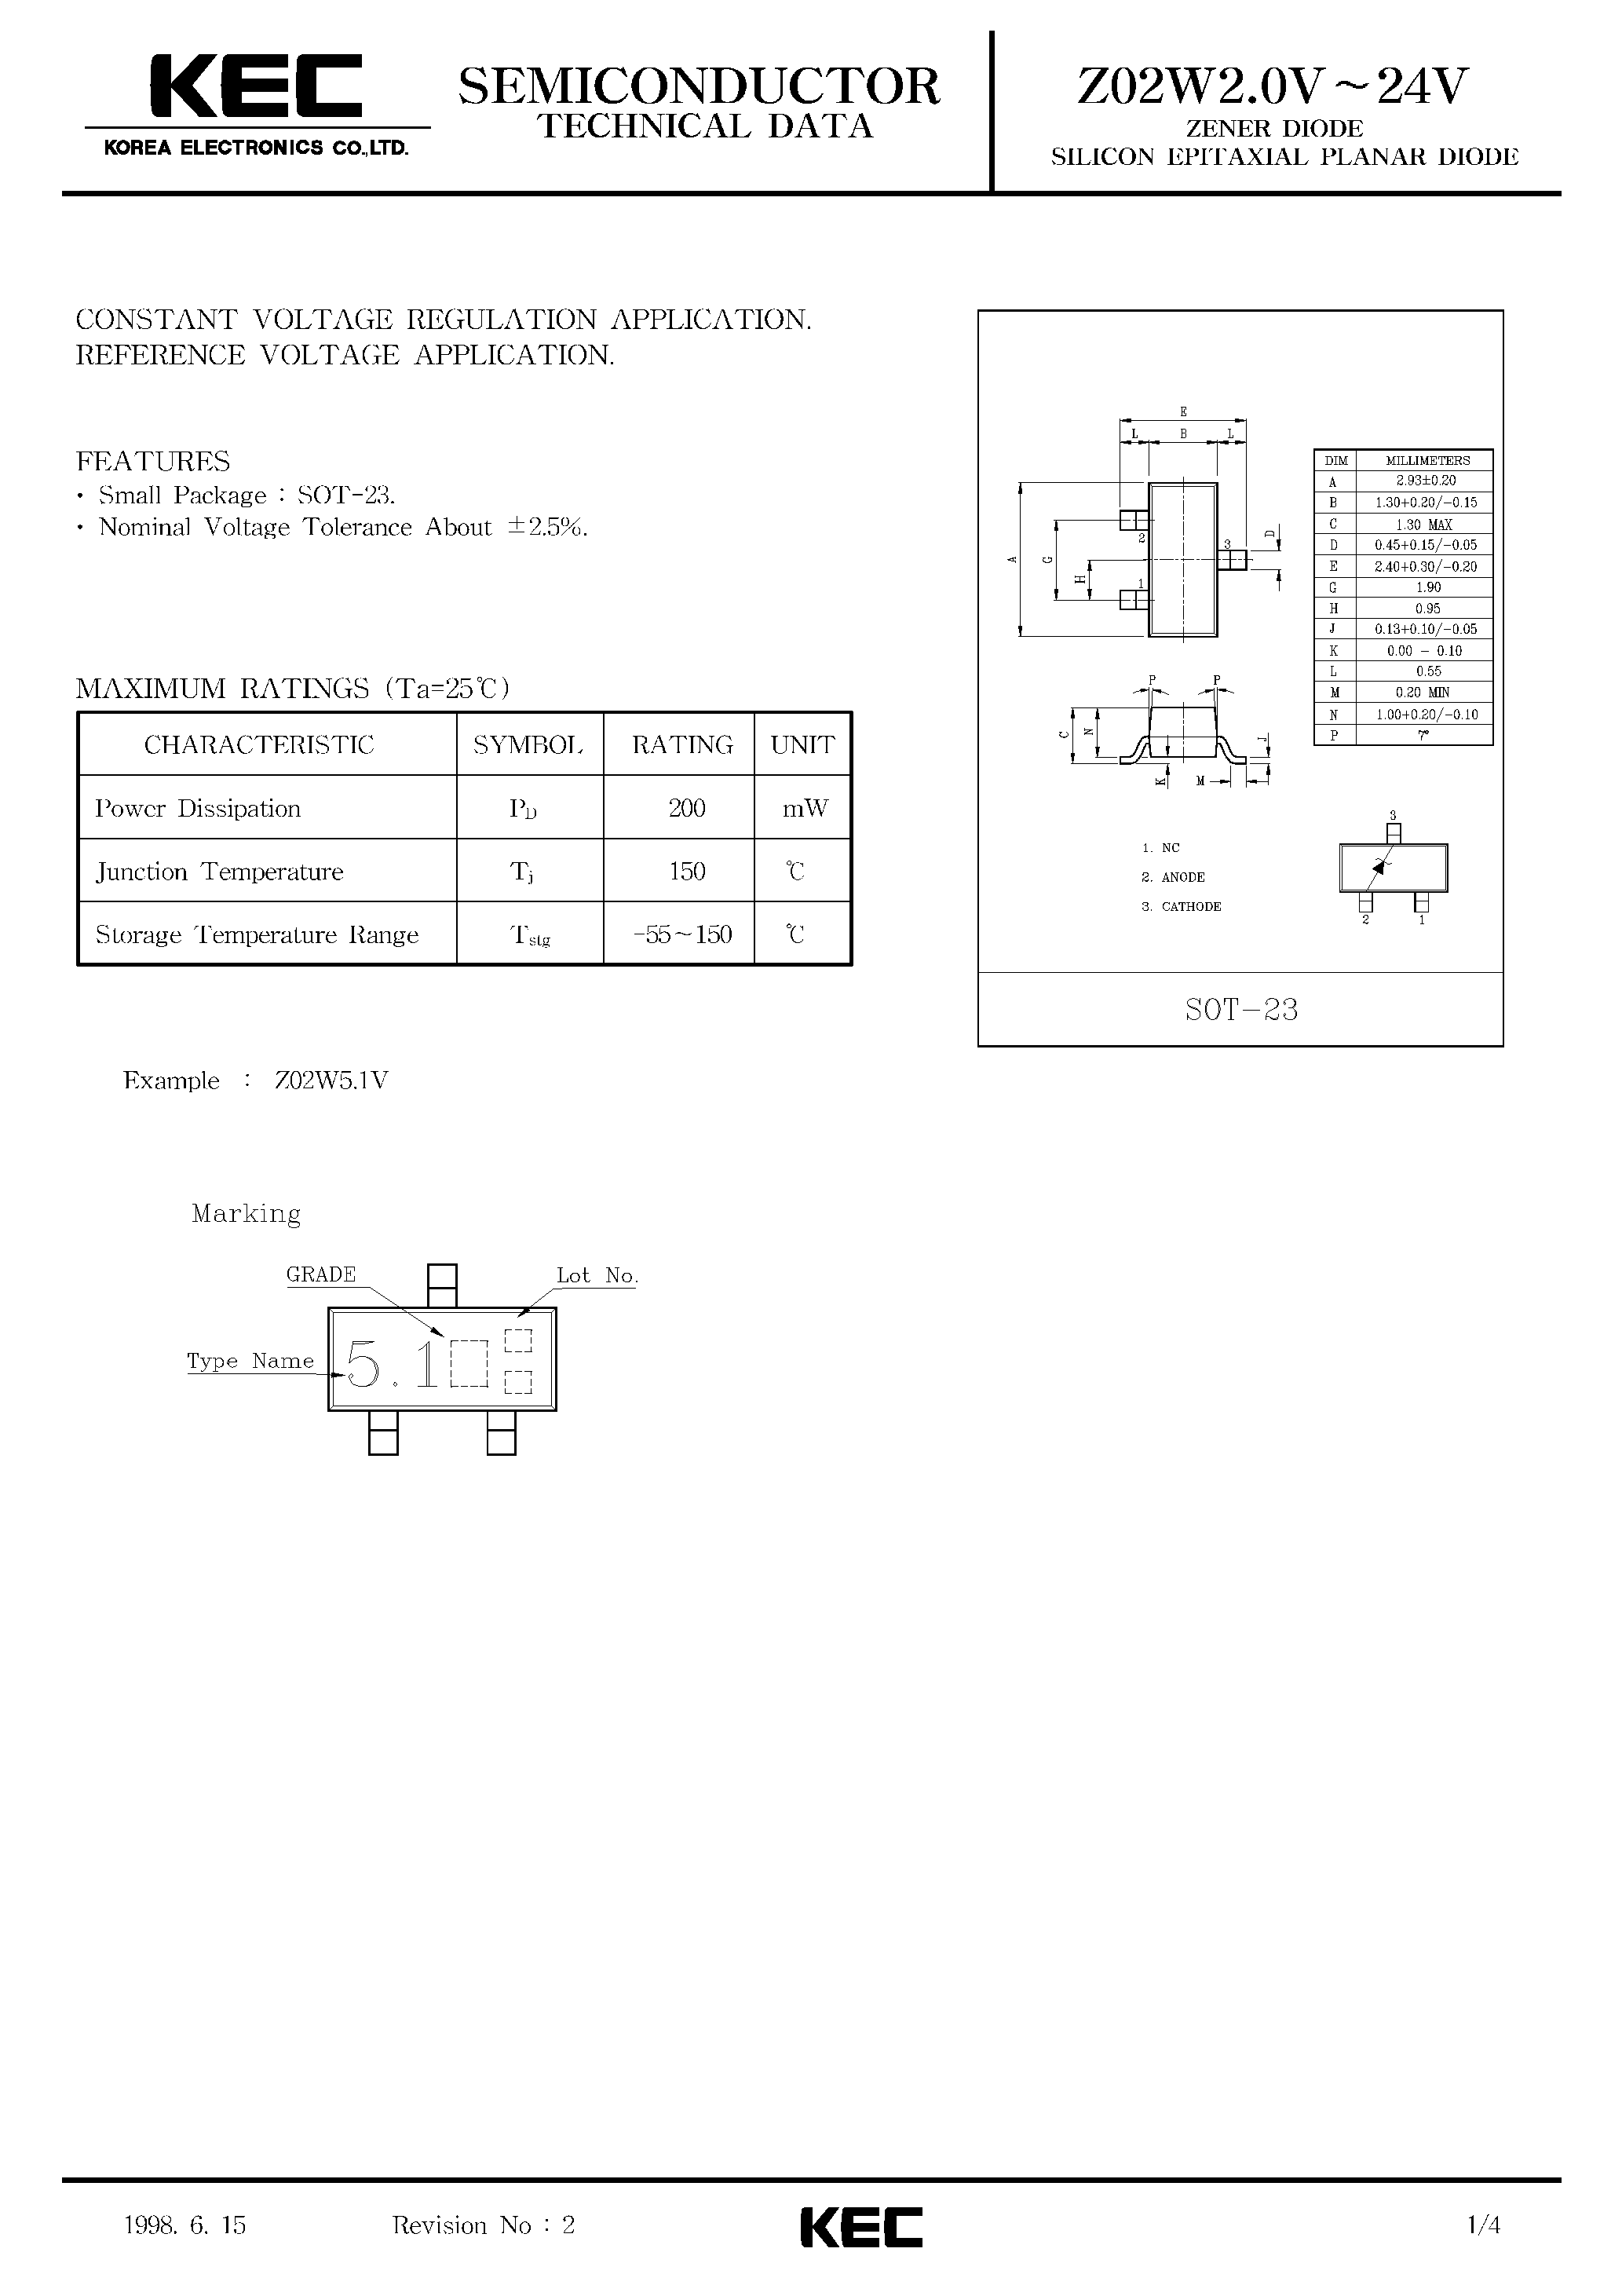 Datasheet Z02W13V - ZENER DIODE SILICON EPITAXIAL PLANAR DIODE page 1